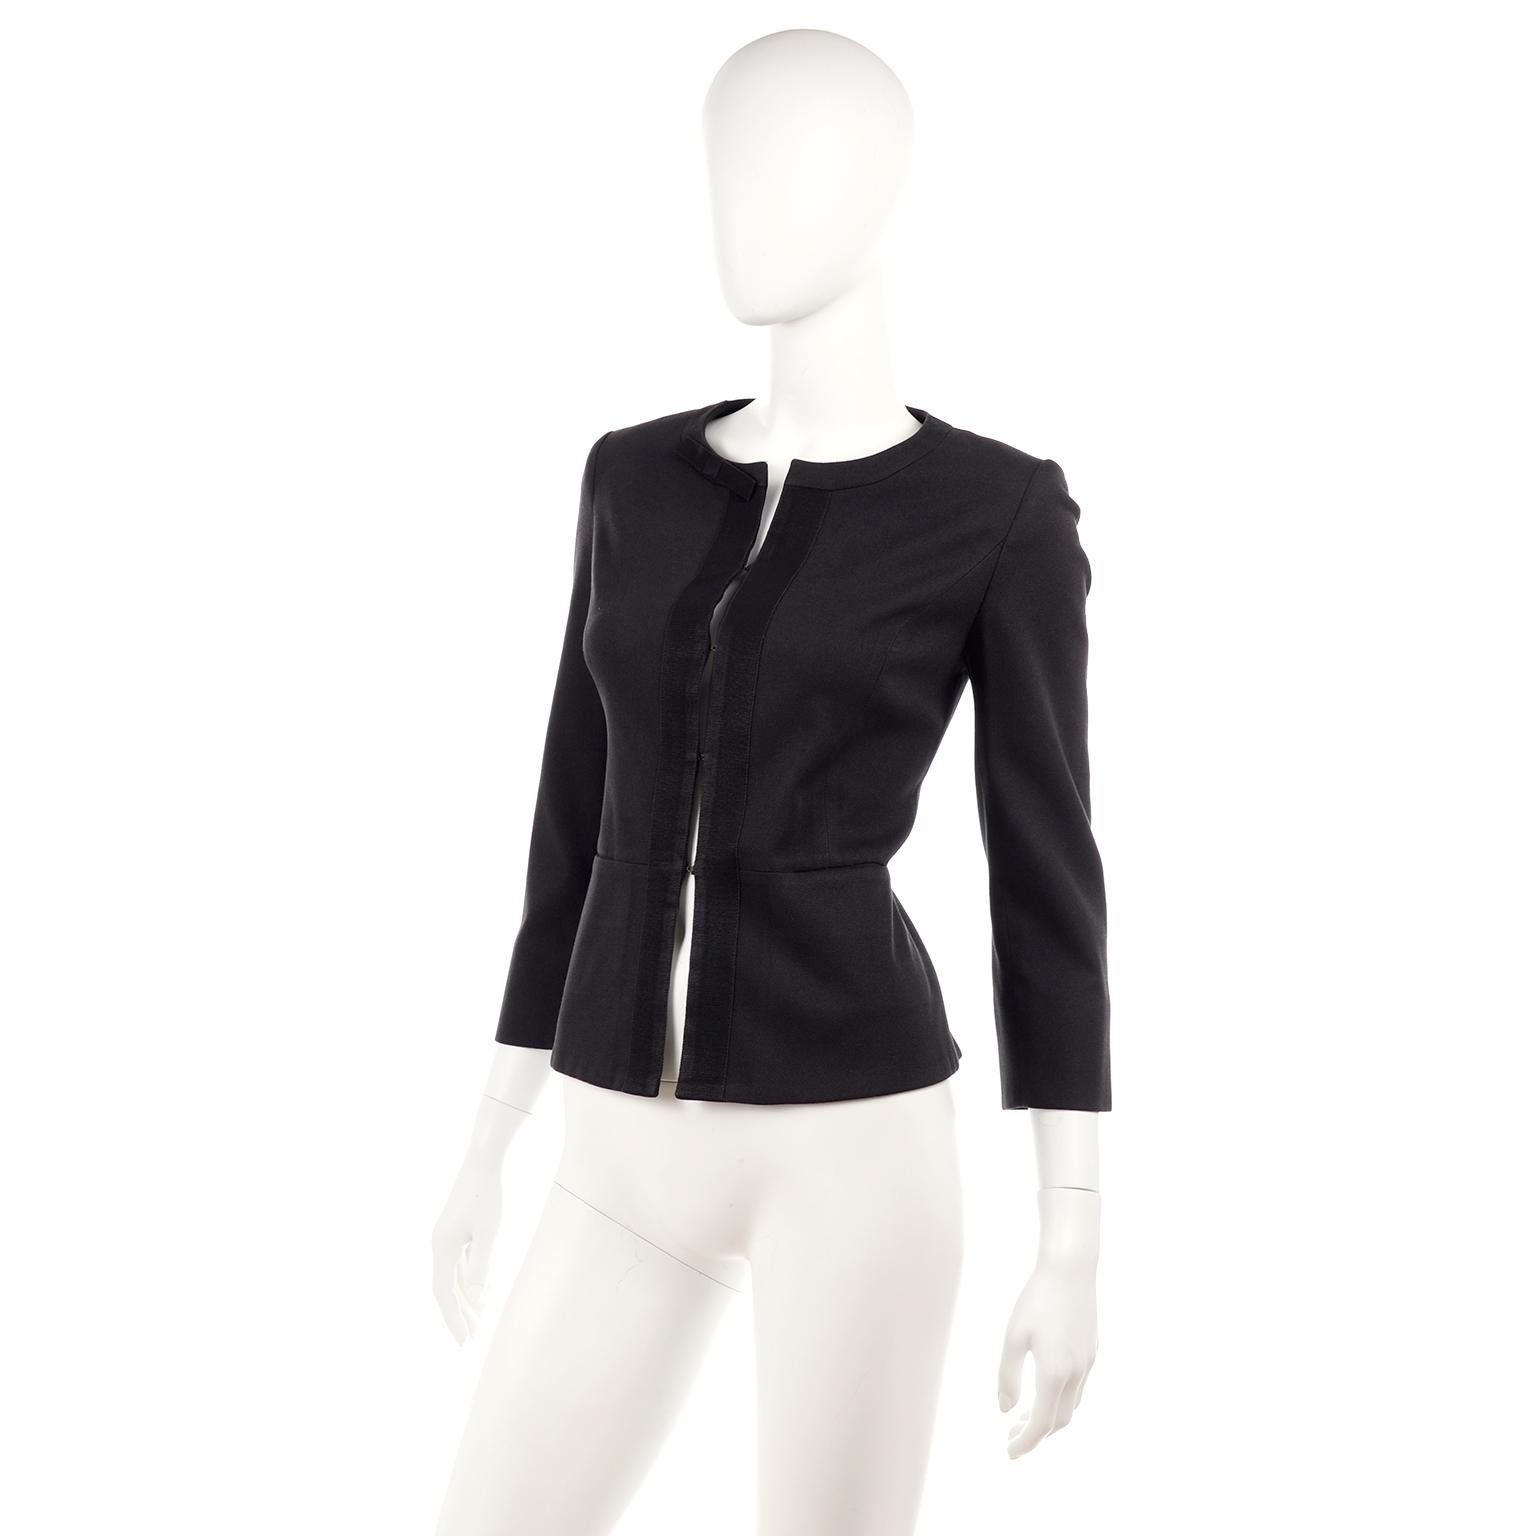 This is a gorgeous washed black or charcoal blazer jacket from Louis Vuitton Uniformes. It has 3/4 sleeves with a slit at the opening, and a grosgrain ribbon trim that creates a bow on the left side of the collar. It has subtle shoulder pads. It